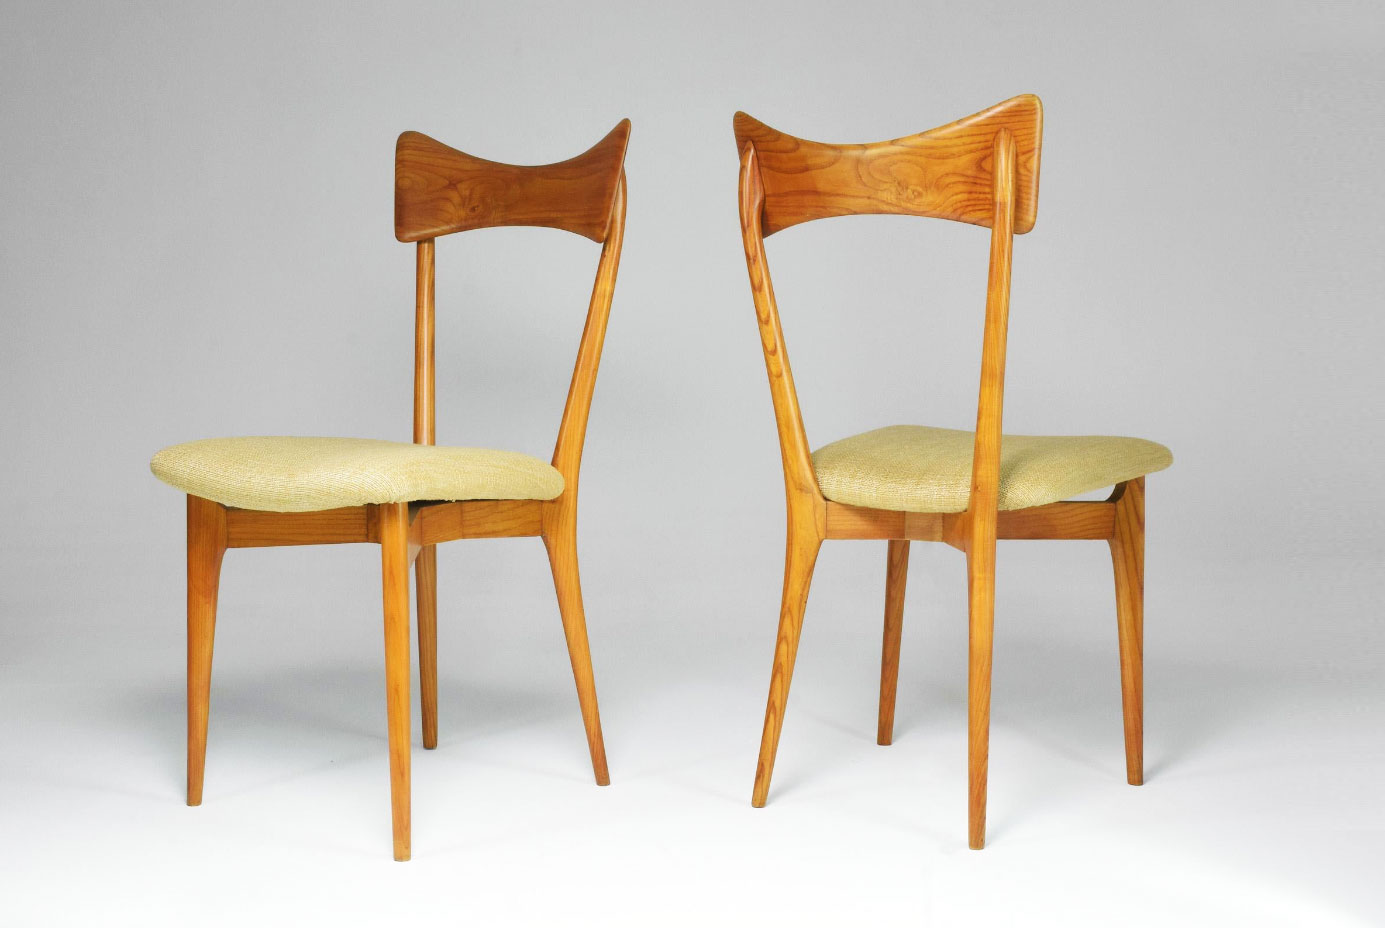 Pair of 1954 beechwood chairs designed by Ico and Luisa Parisi for Ariberto Colombo